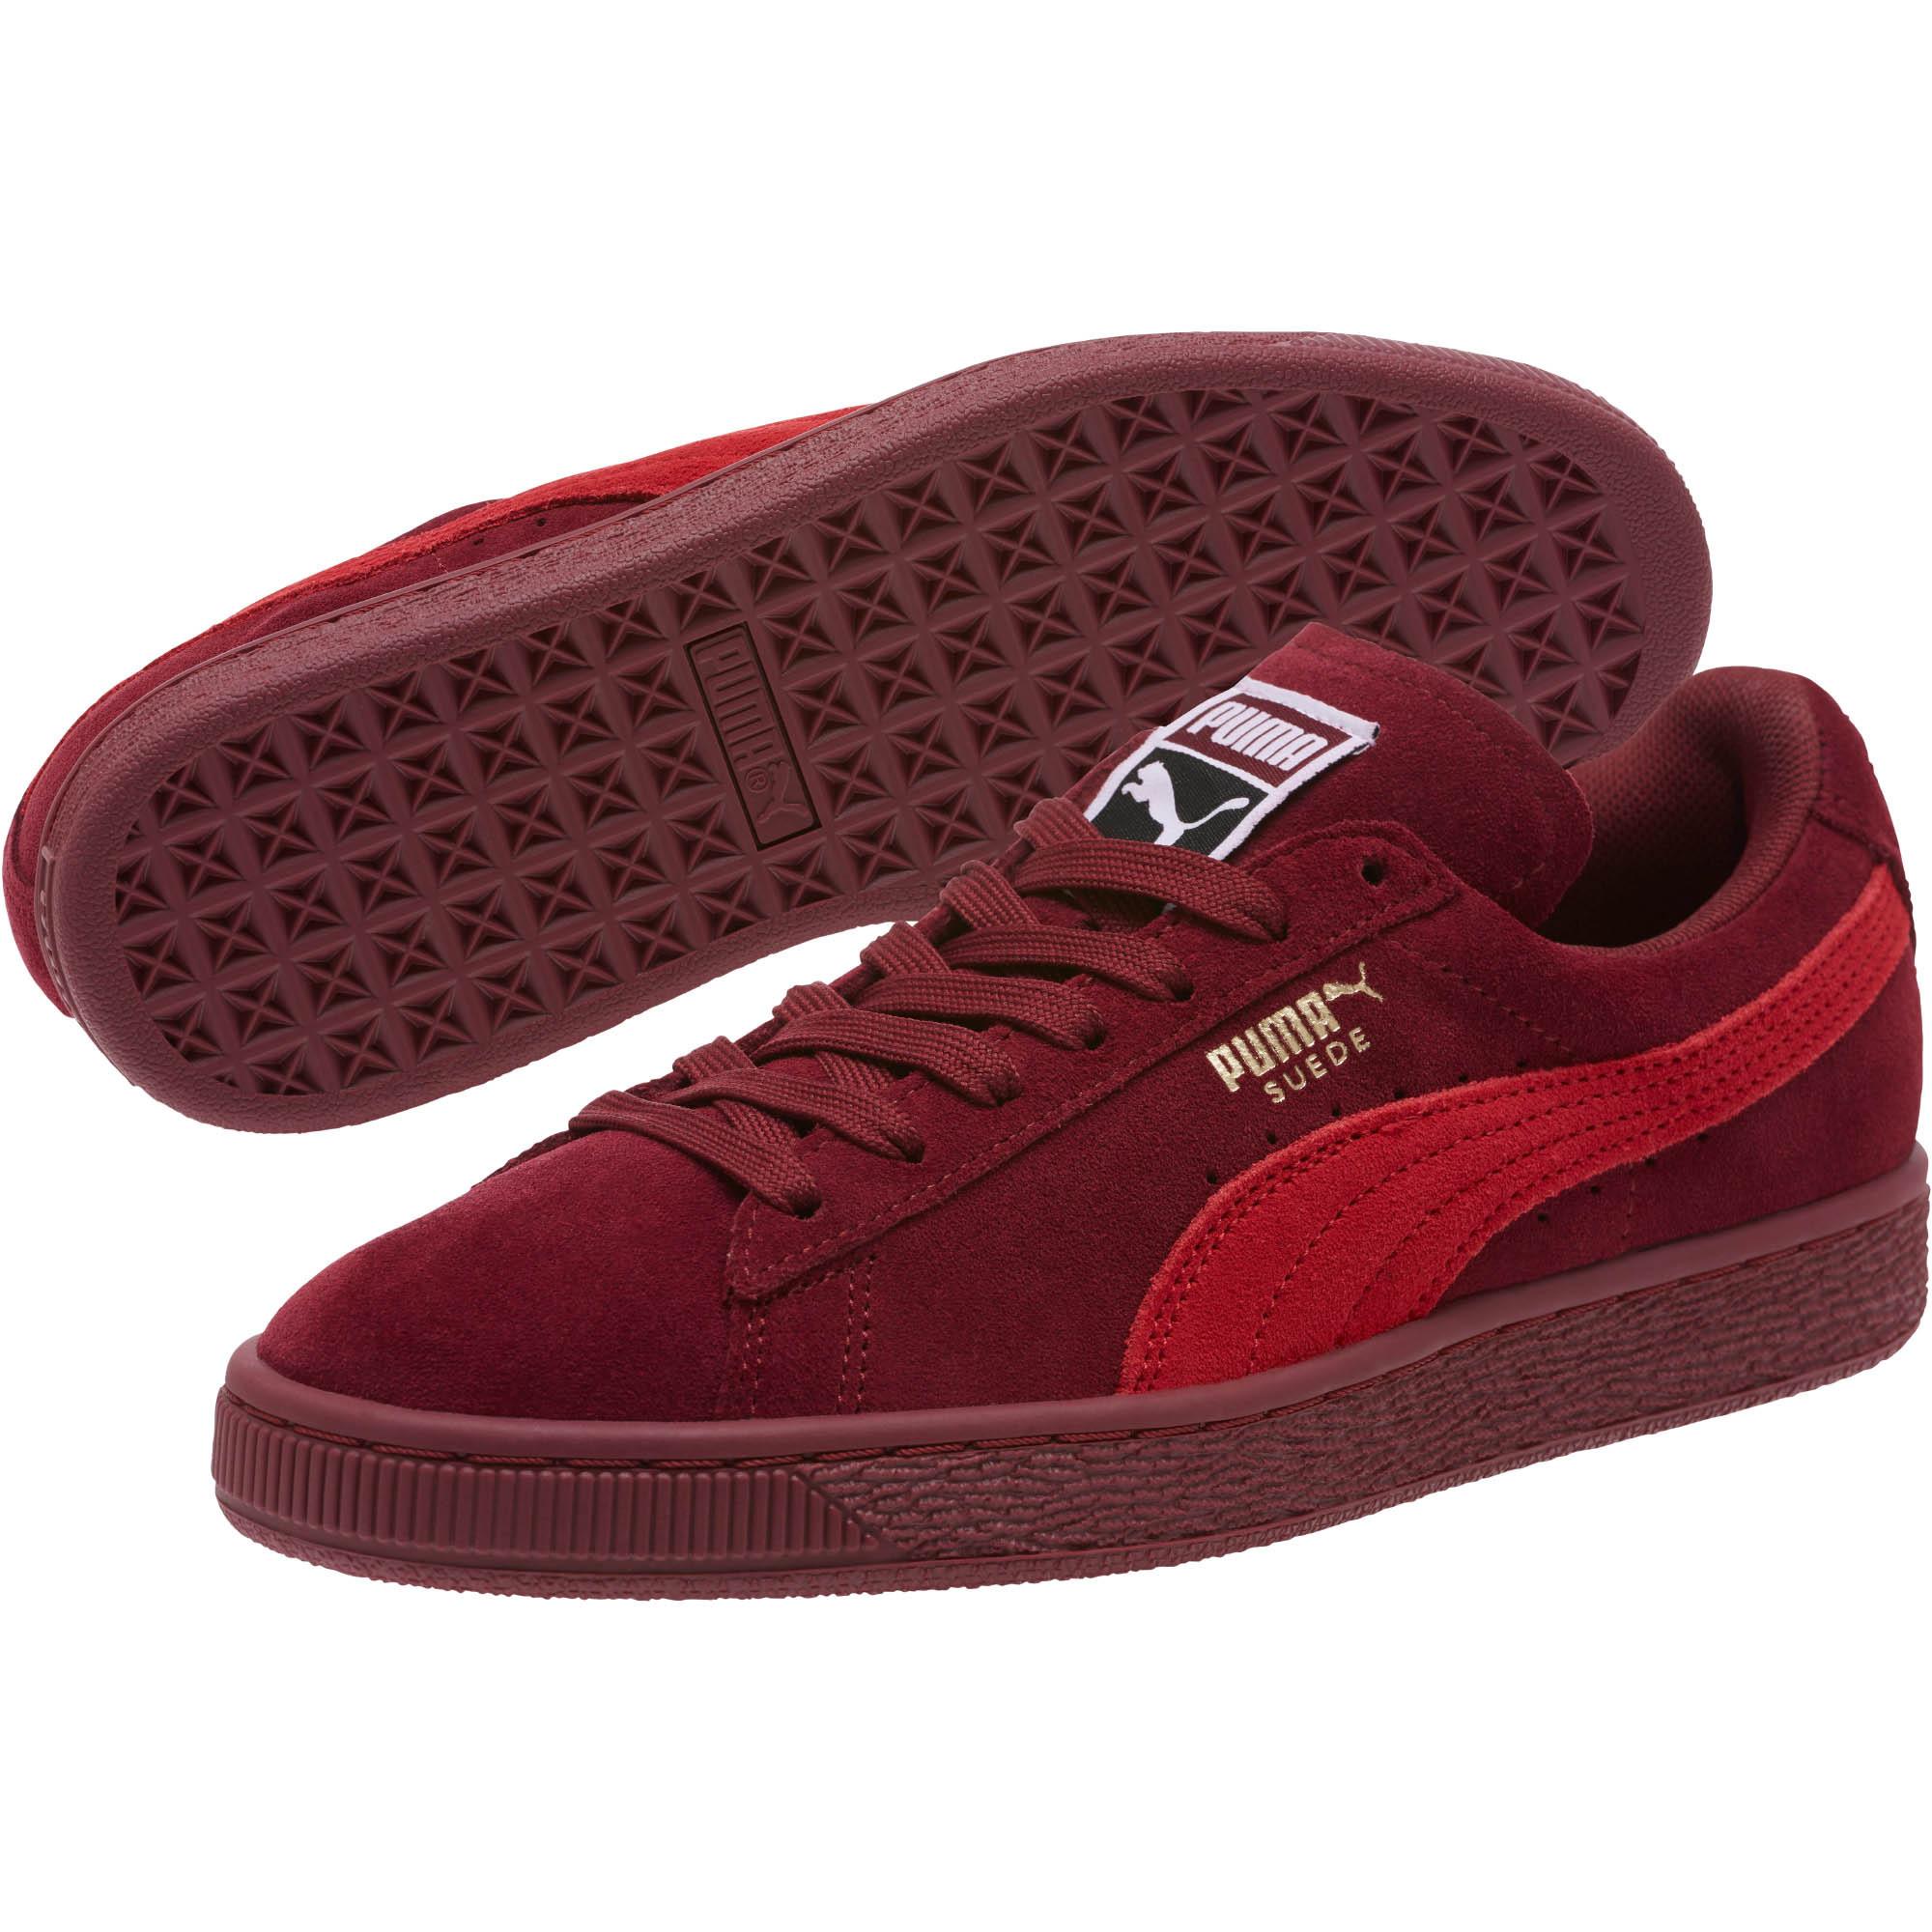 PUMA Suede Classic Women's Sneakers in 74 (Red) - Lyst